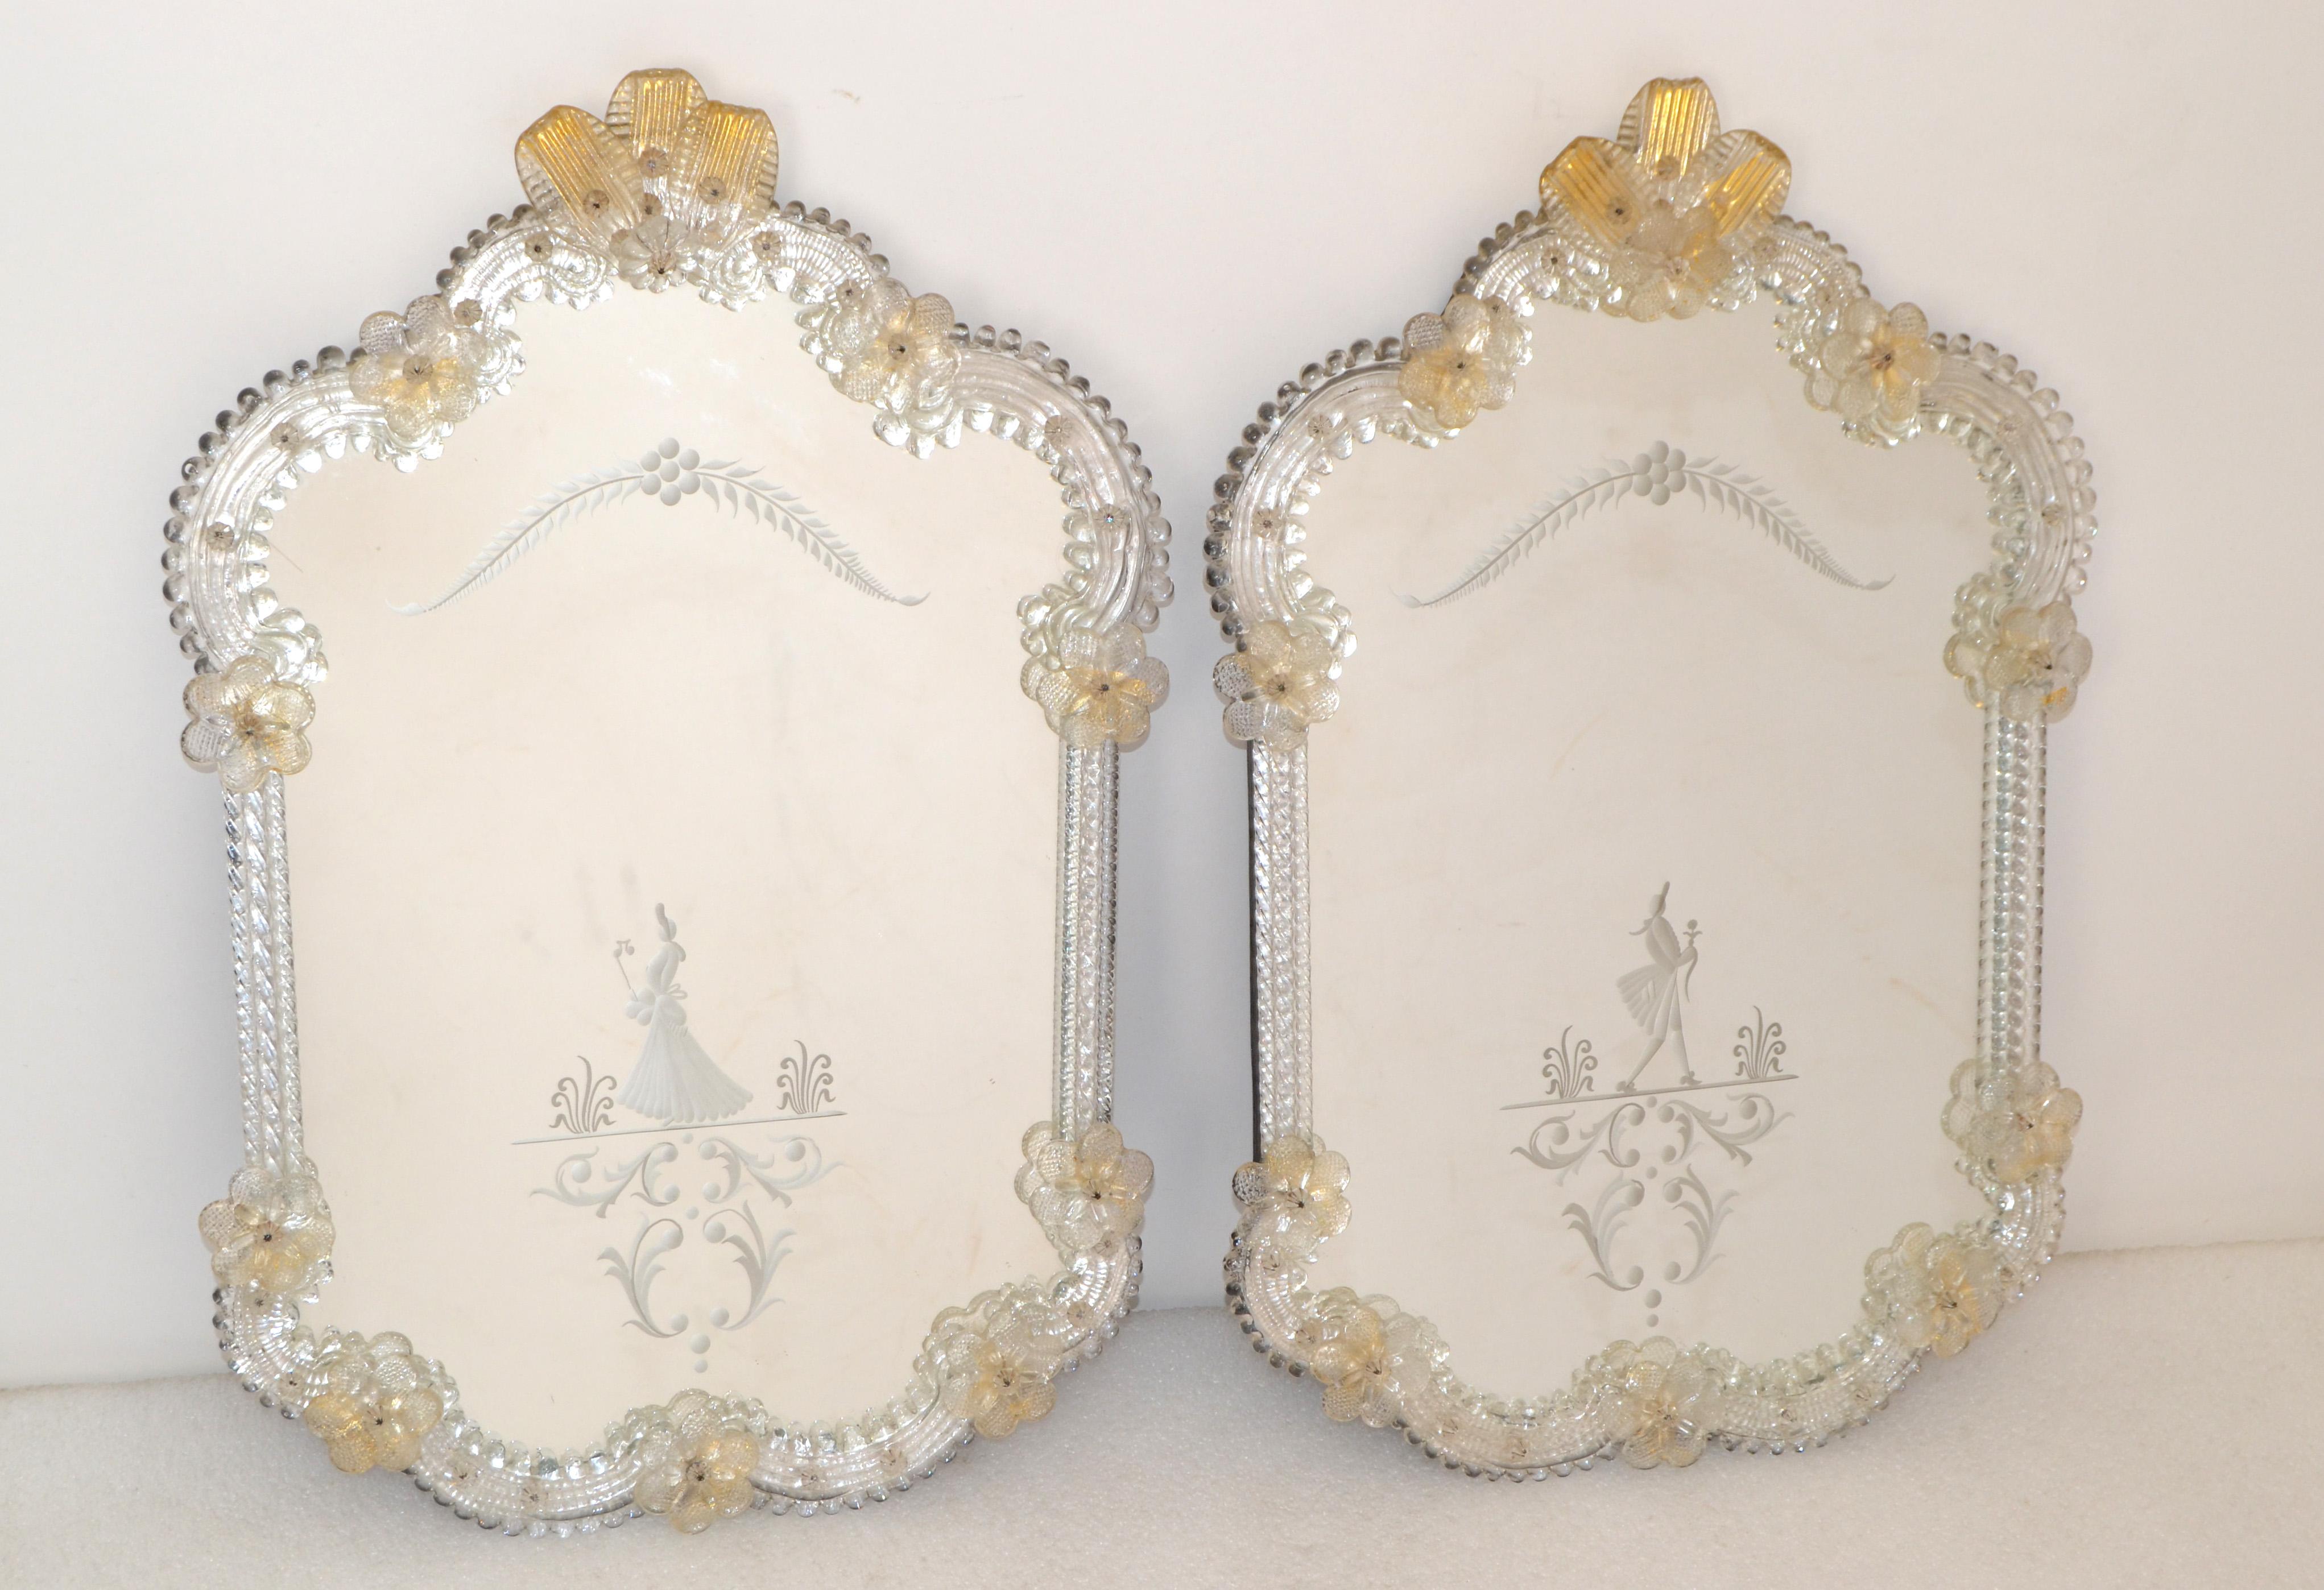 Fabulous Pair of Rococo Revival Style Venetian Him and Her wall mirror ornate etched with Bohemian gold dust flowers and leaves surrounded by twisted Murano glass.
Depicting a Man holding a rose and a Woman singing, surrounded by etched flowers and